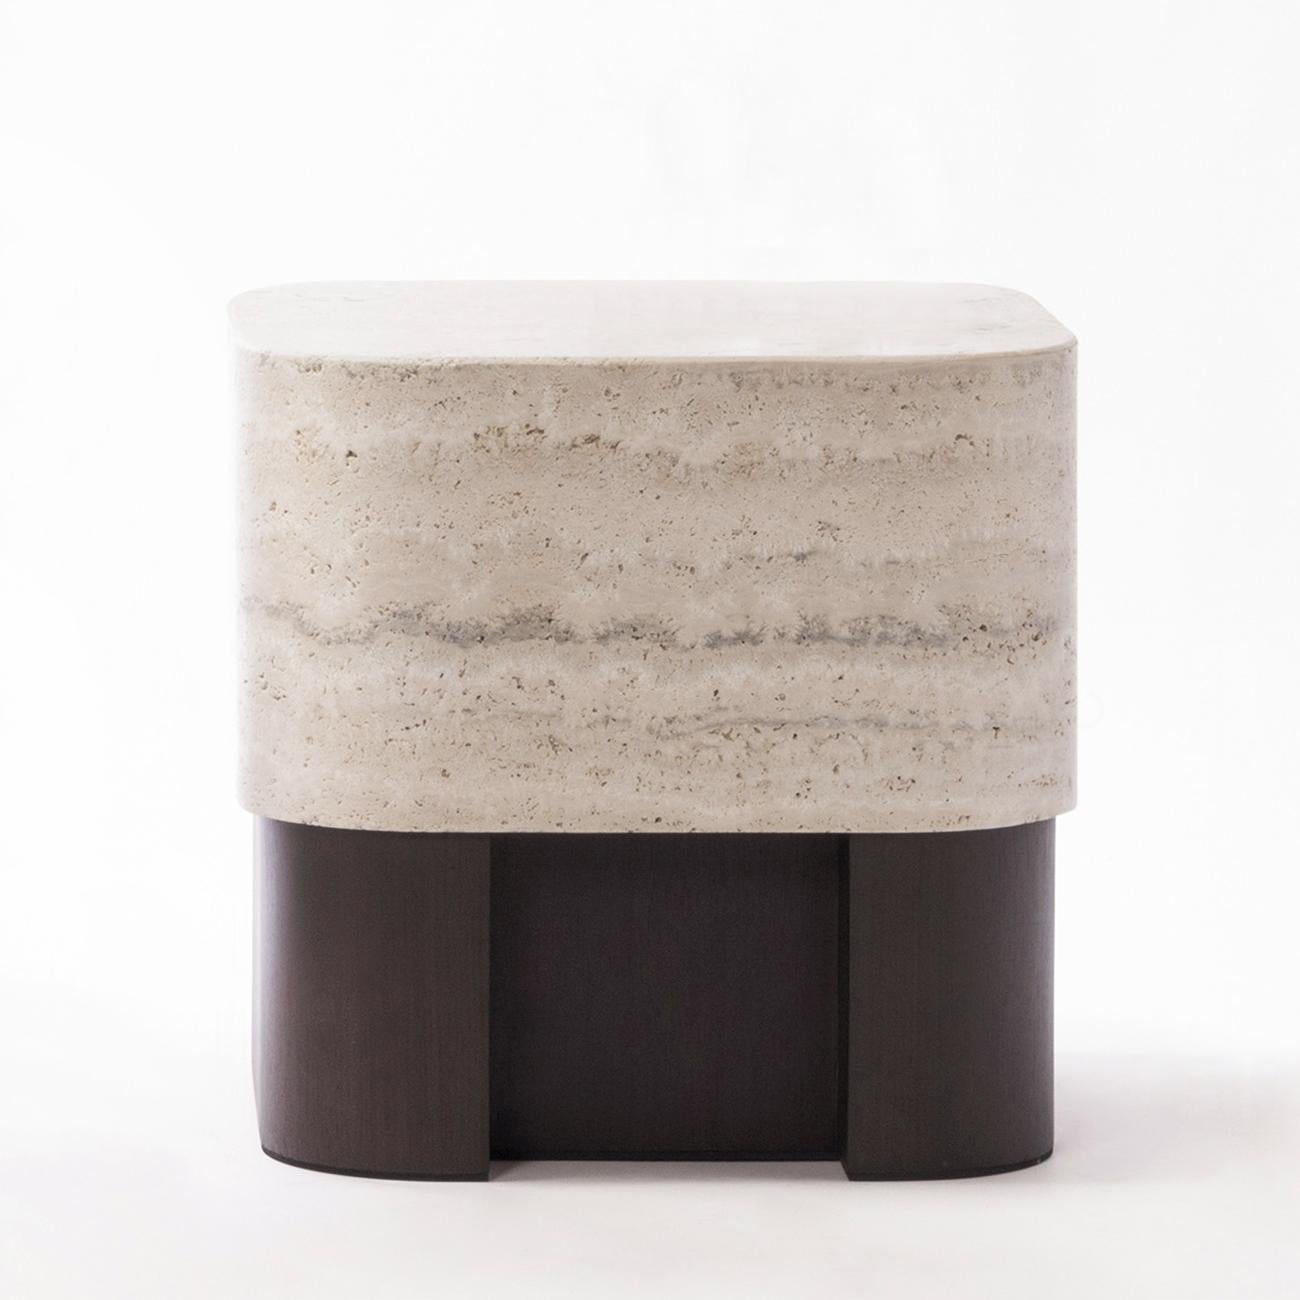 Side table travertine large with solid walnut 
base and with travertine carved marble top.